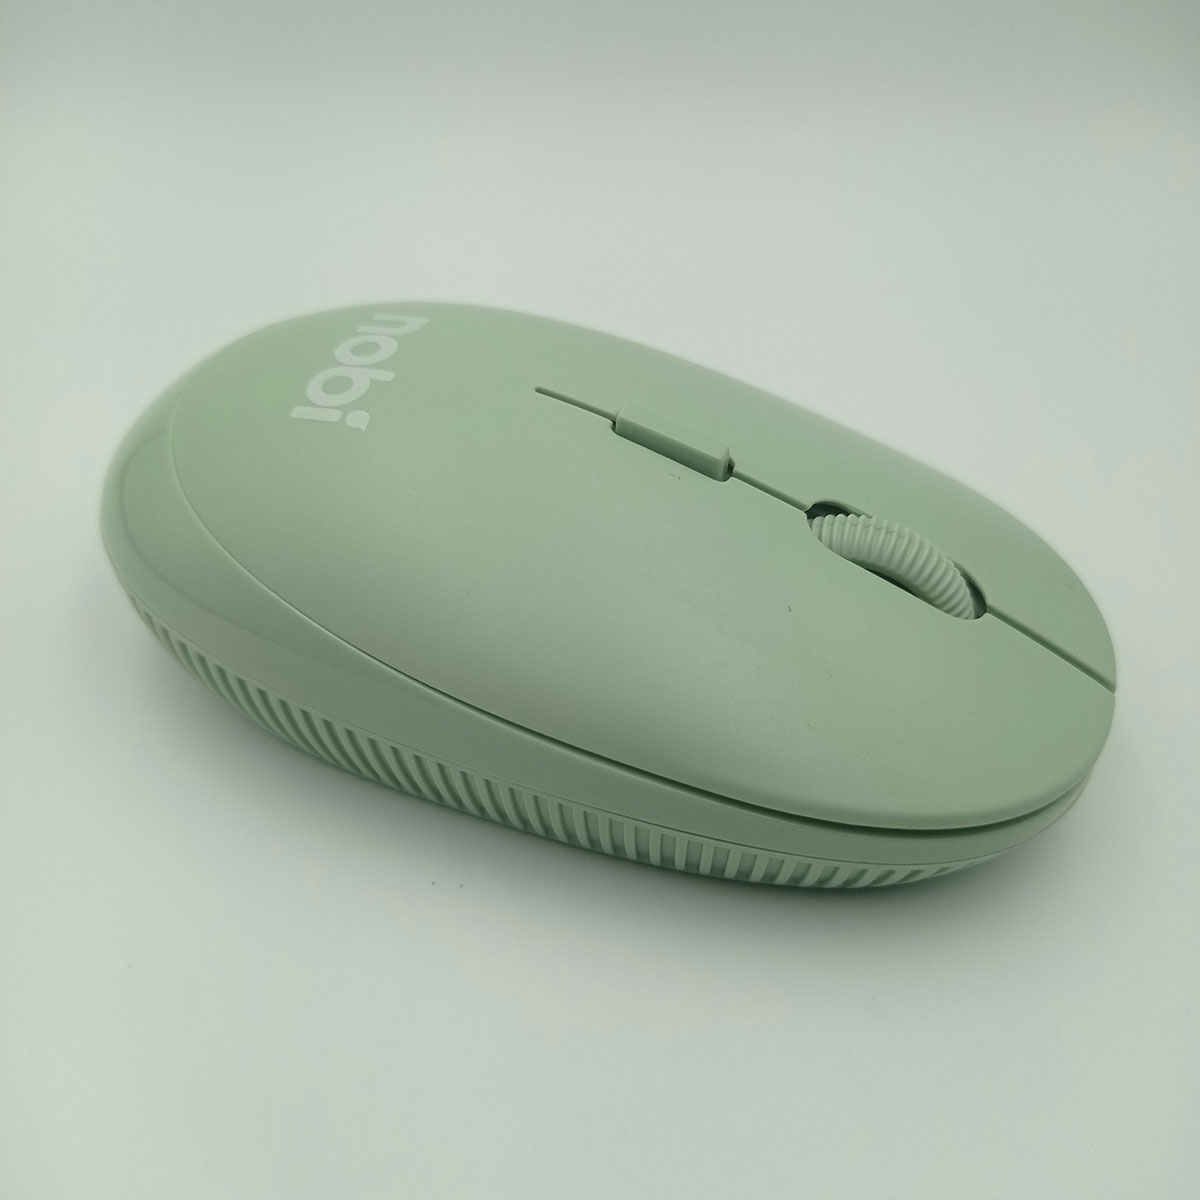 nm71-wireless-mouse-green-02